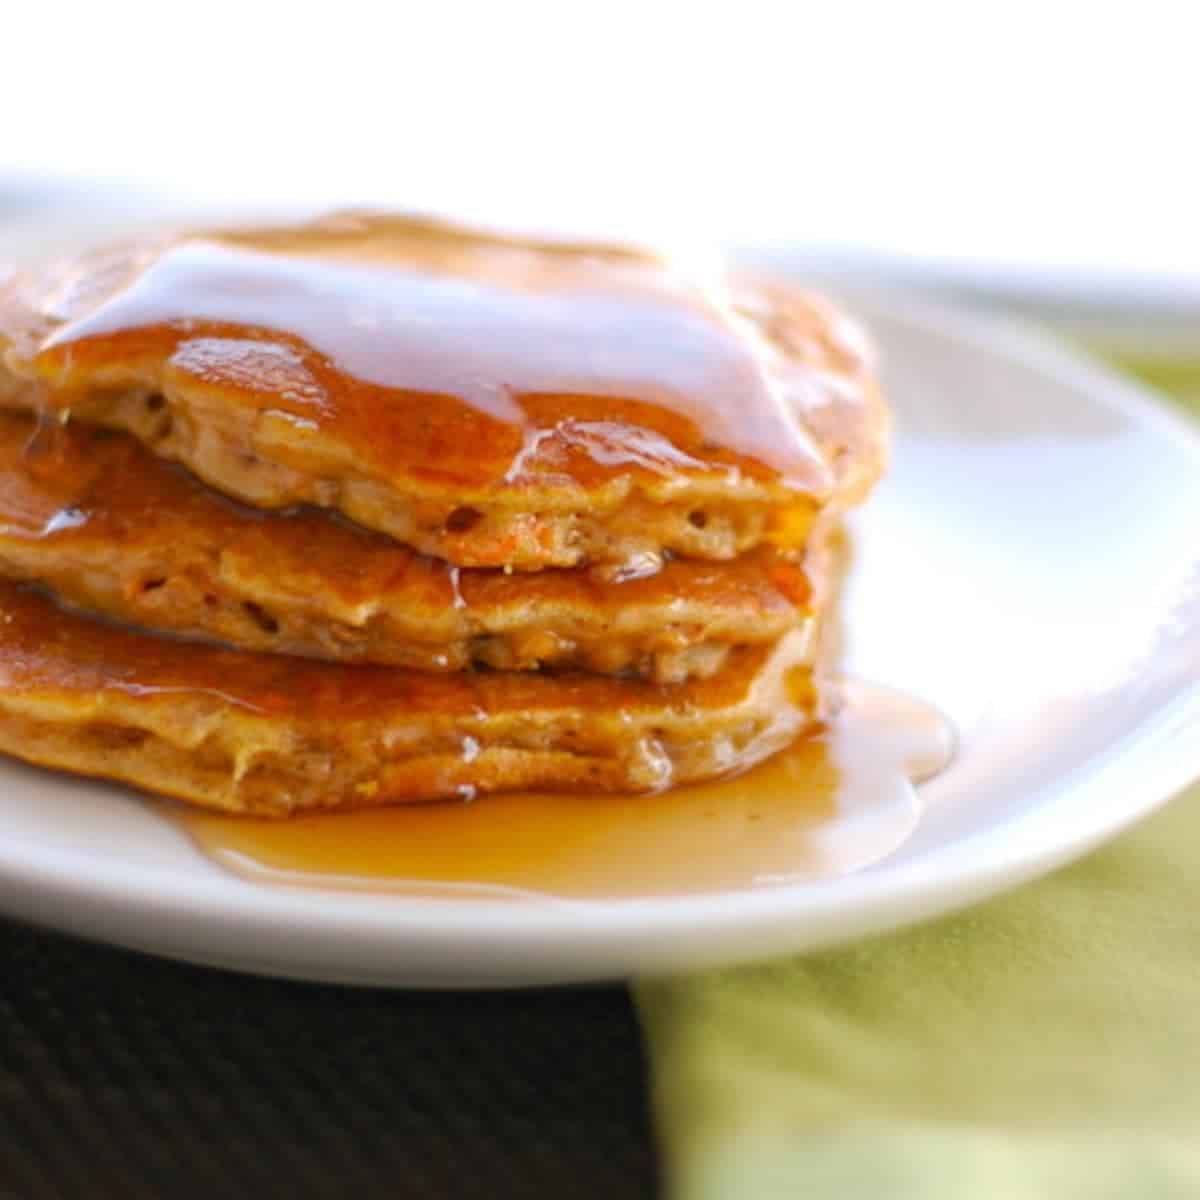 Cinnamon apple carrot pancakes with syrup drizzle on a white plate.